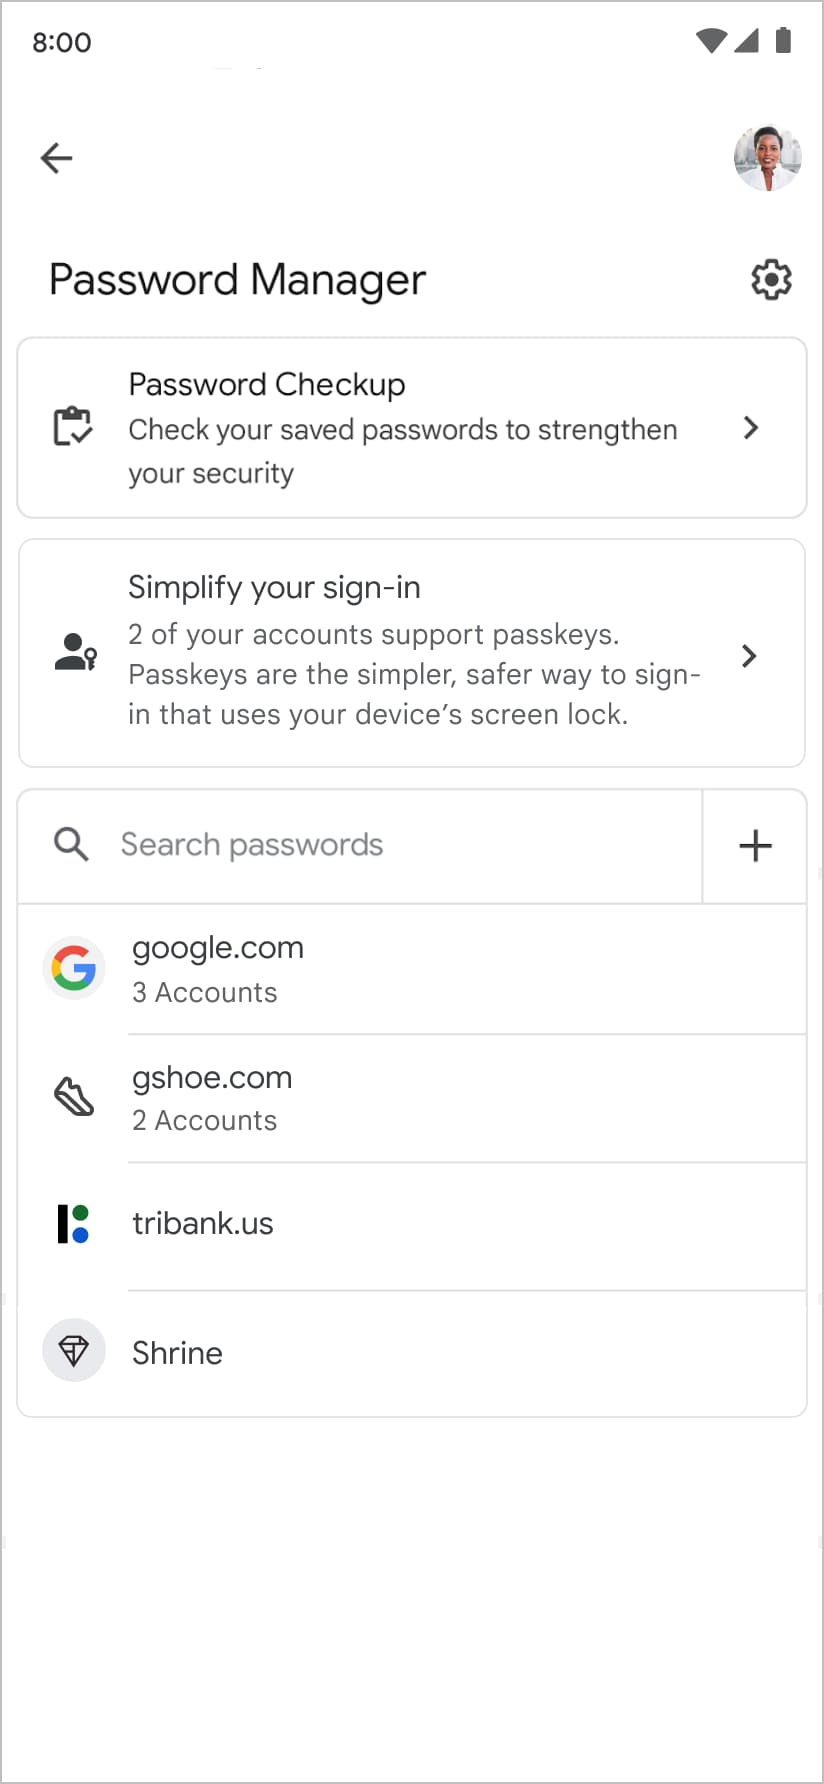 Google Password Manager suggests that the user create a passkey when reviewing their list of existing passwords and passkeys.